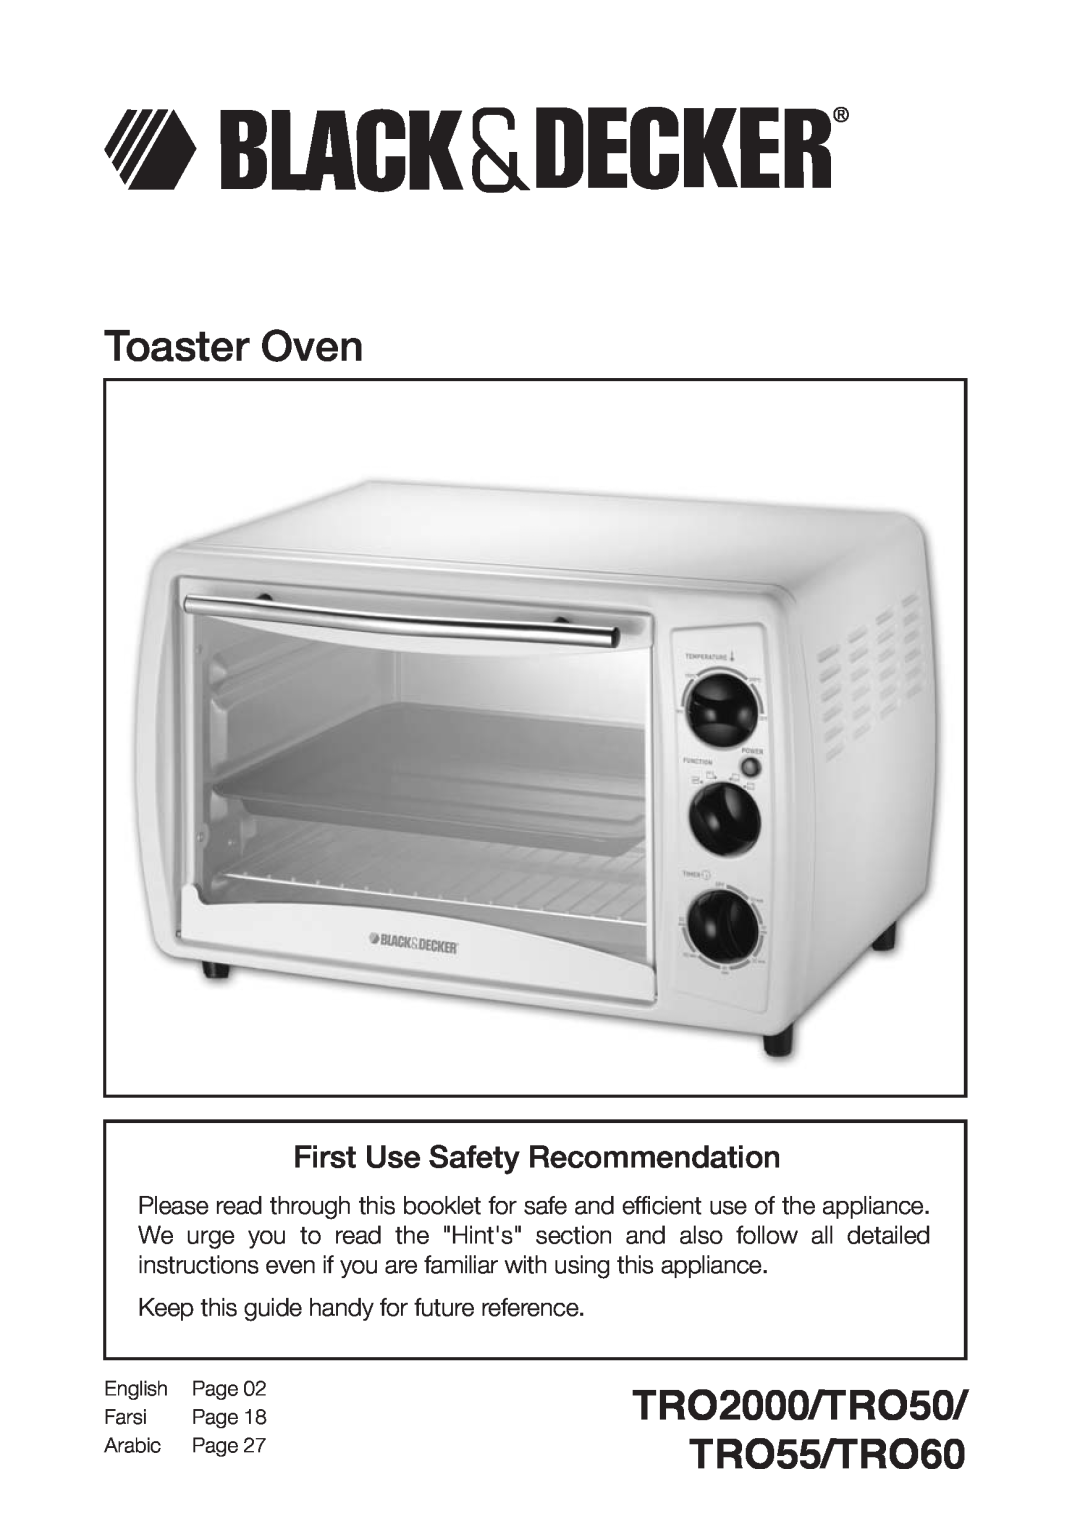 Black & Decker manual First Use Safety Recommendation, Toaster Oven, TRO2000/TRO2000R TRO50/TRO55/TRO60, English, Page 